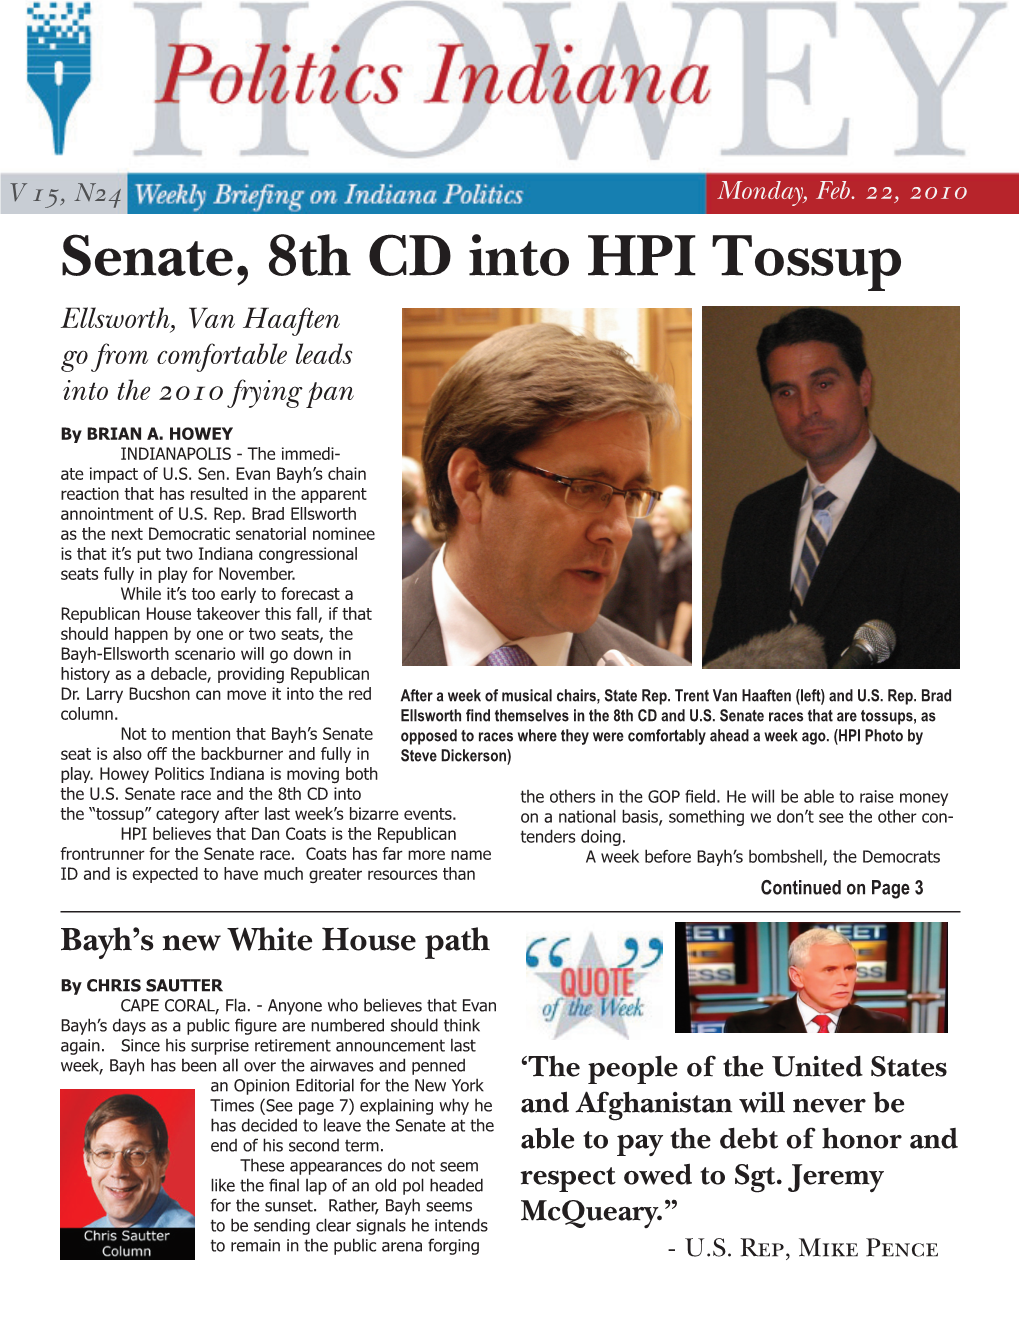 Senate, 8Th CD Into HPI Tossup Ellsworth, Van Haaften Go from Comfortable Leads Into the 2010 Frying Pan